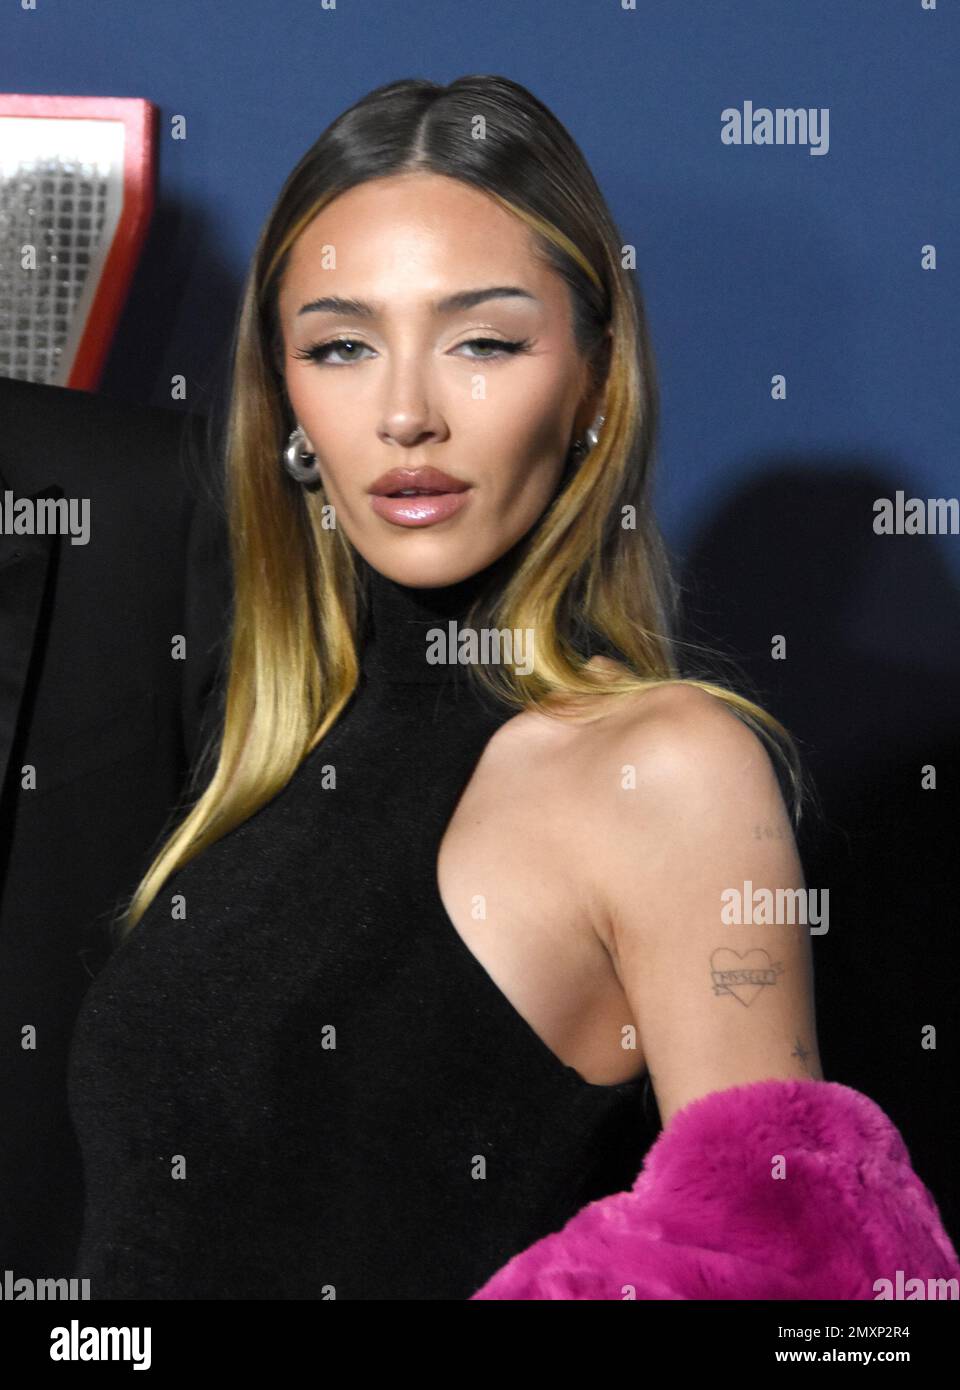 Los Angeles, California, USA 31st January 2023 Actress Delilah Belle Hamlin attends the Los Angeles Premiere Screening of Paramount Pictures' '80 for Brady' at Regency Village Theatre on January 31, 2023 in Los Angeles, California, USA. Photo by Barry King/Alamy Stock Photo Stock Photo